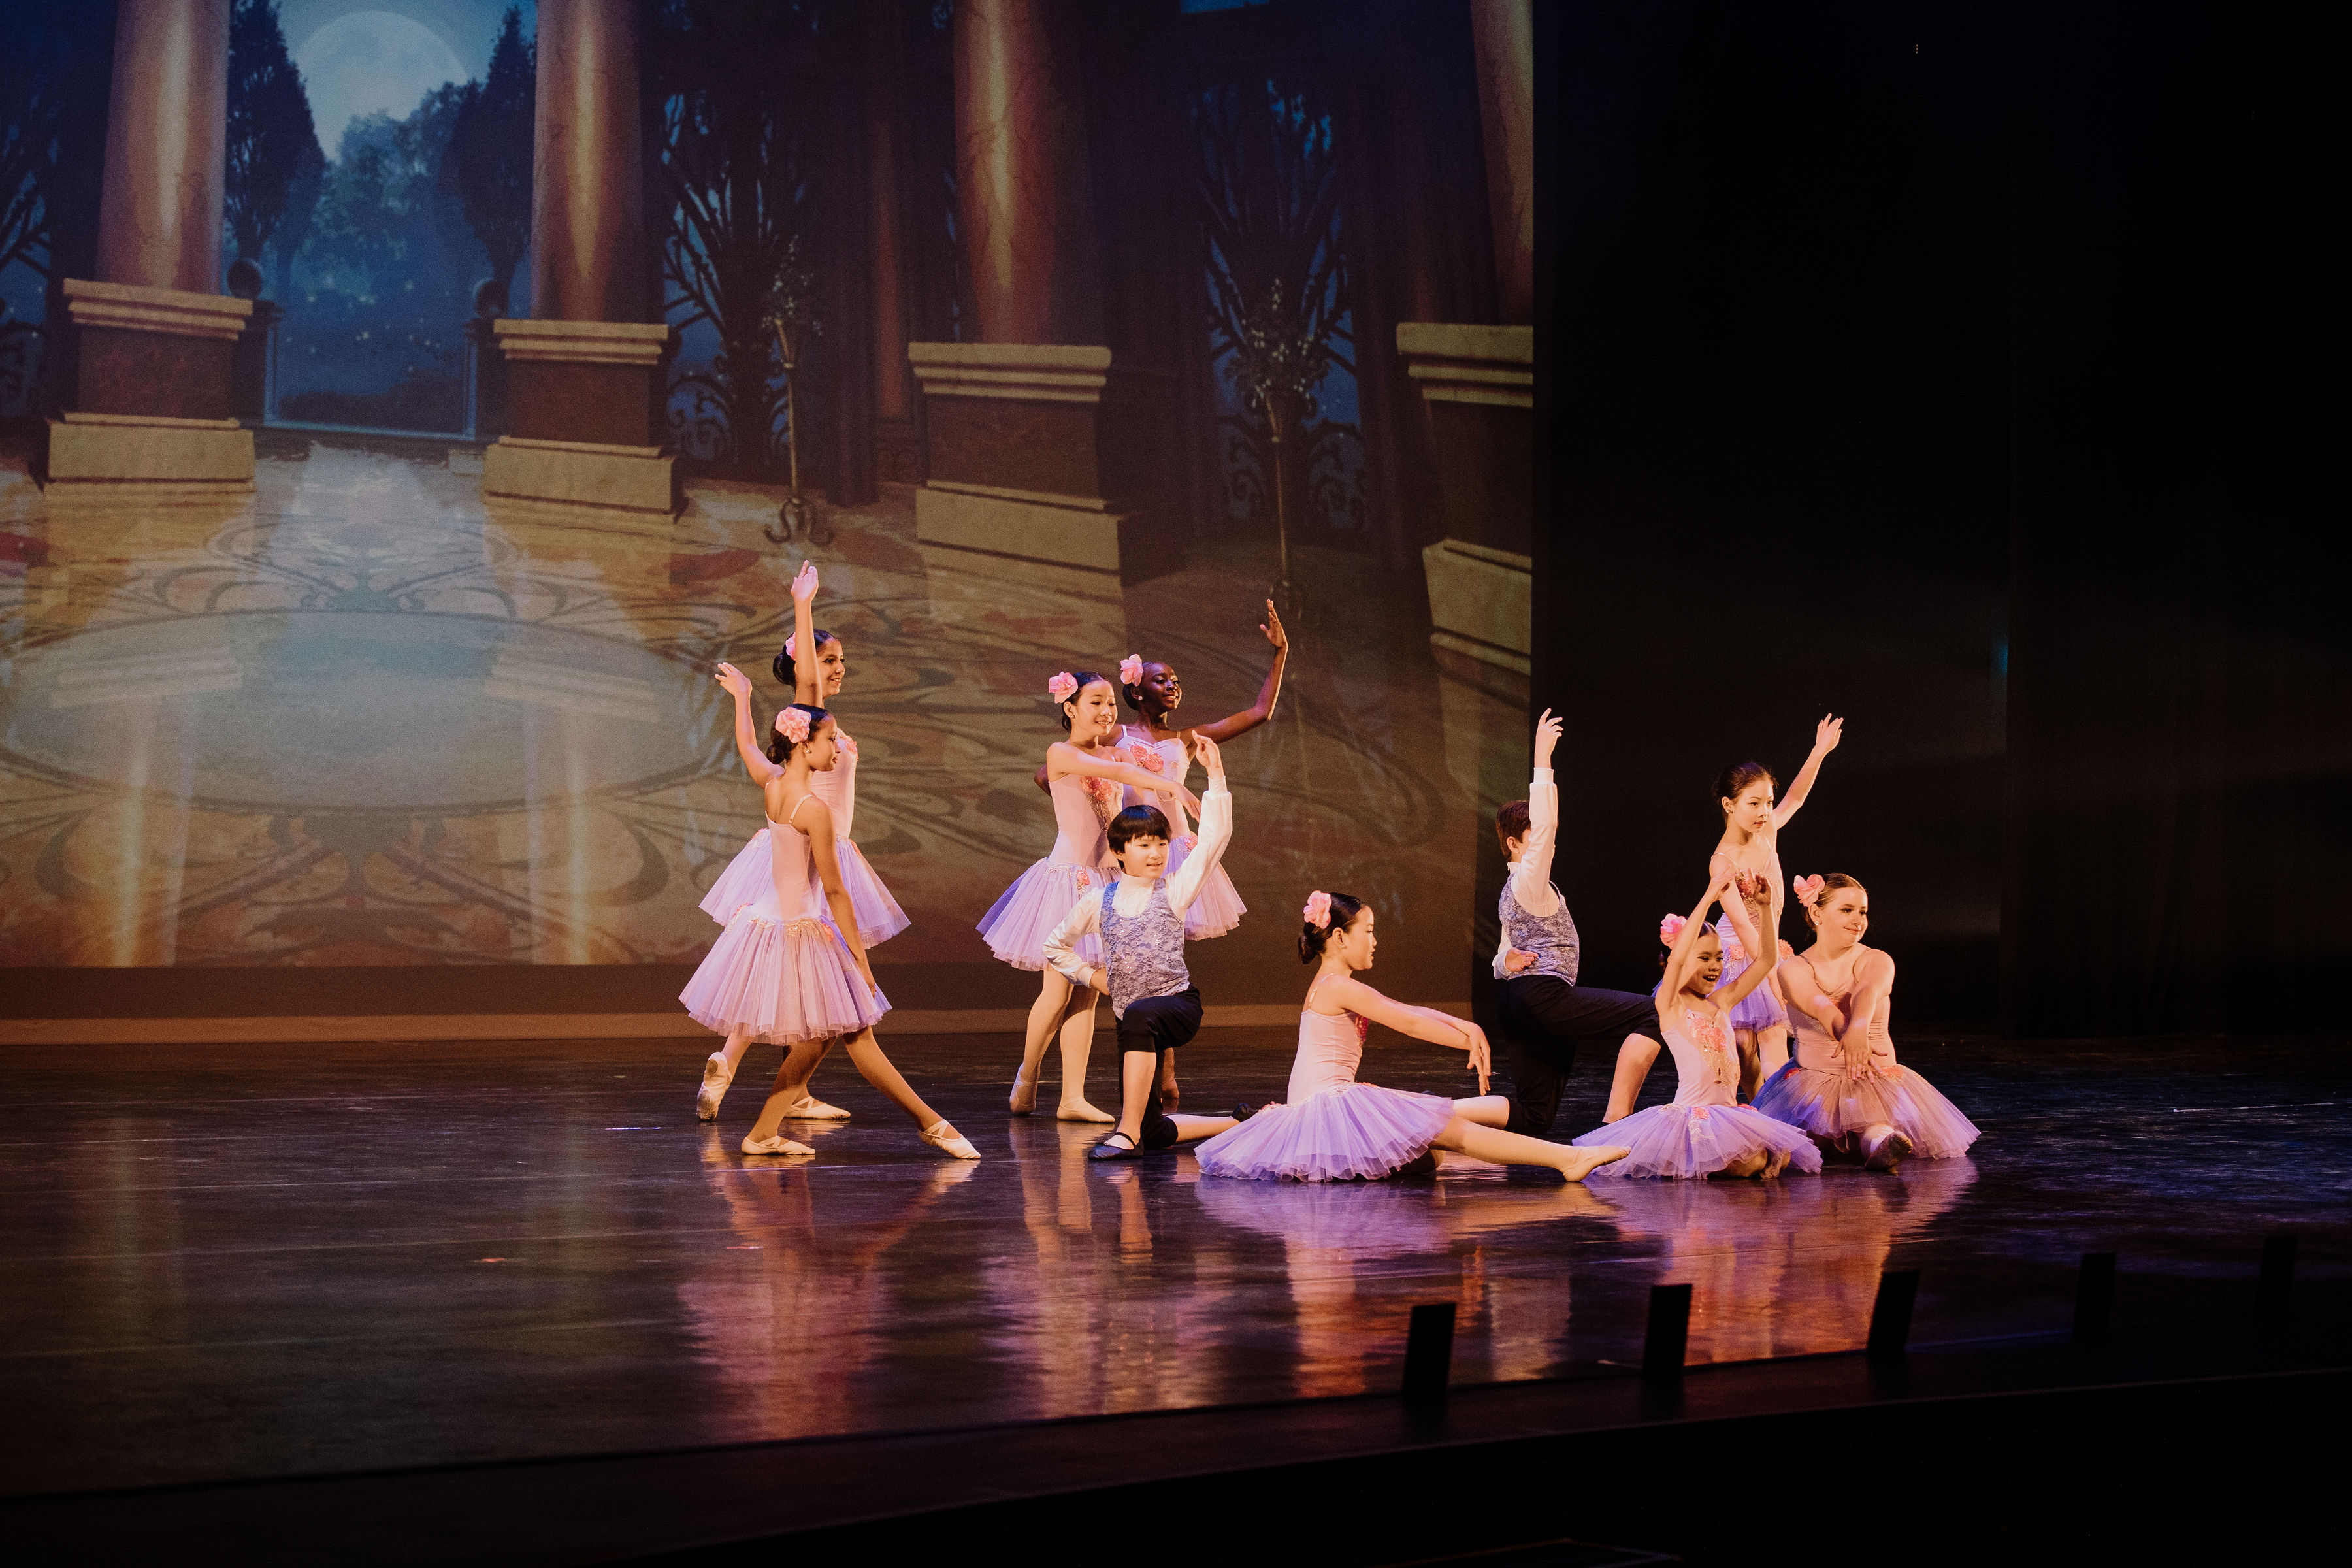 Final pose in large group ballet performance